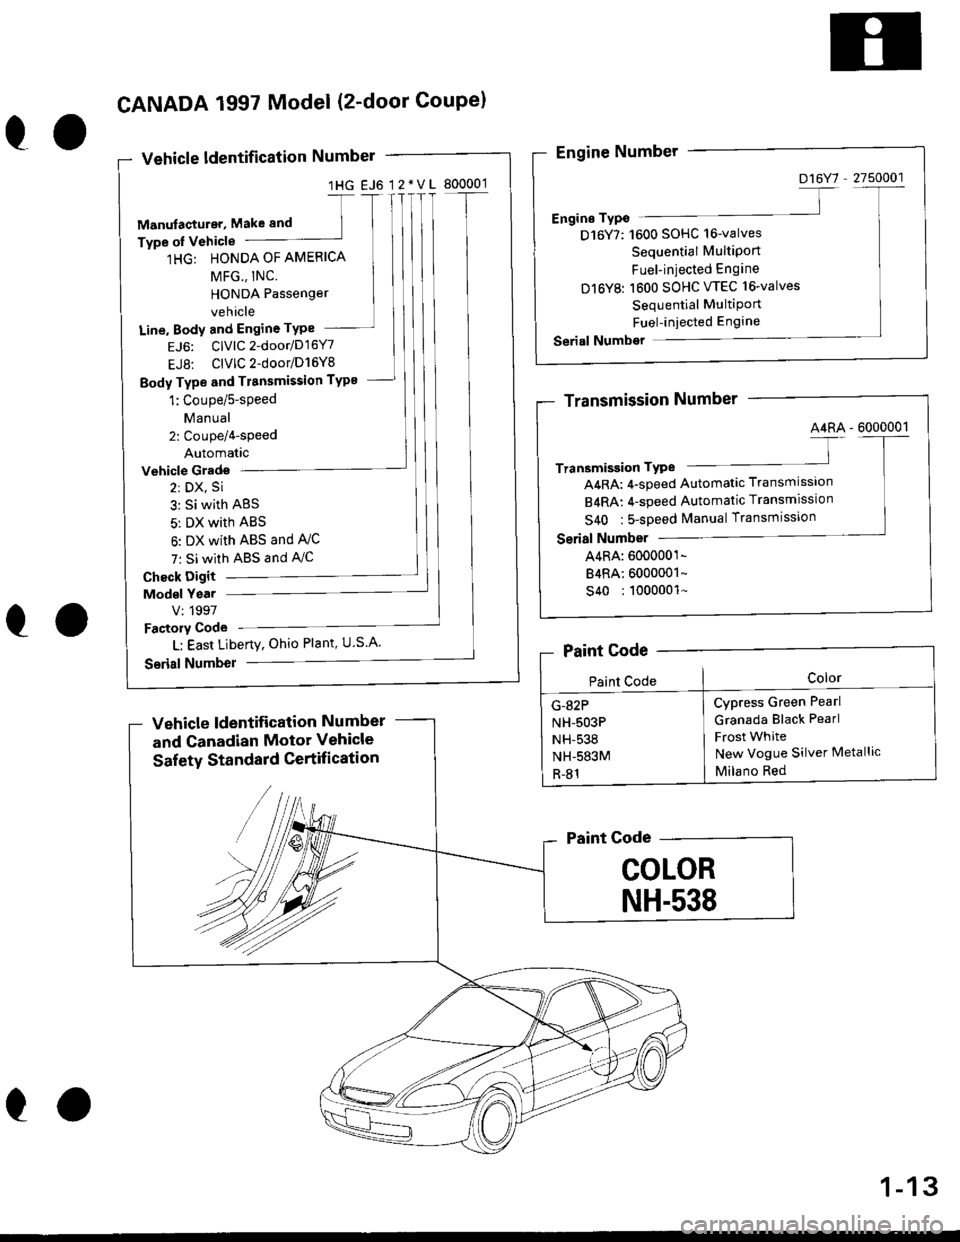 HONDA CIVIC 1997 6.G User Guide 1HG EJ6 12*VL 800001
1HG: HONDA OF AMERICA
Line, Body and Engine TYPe
EJ6: ClvlC2-door/D16Y7
EJ8: ClVlC2-door/D16Y8
Body Type and Tr8nsmission TYP8
Vehicle Grado
2: DX, Si
3: Si with ABS
5: DX with AB